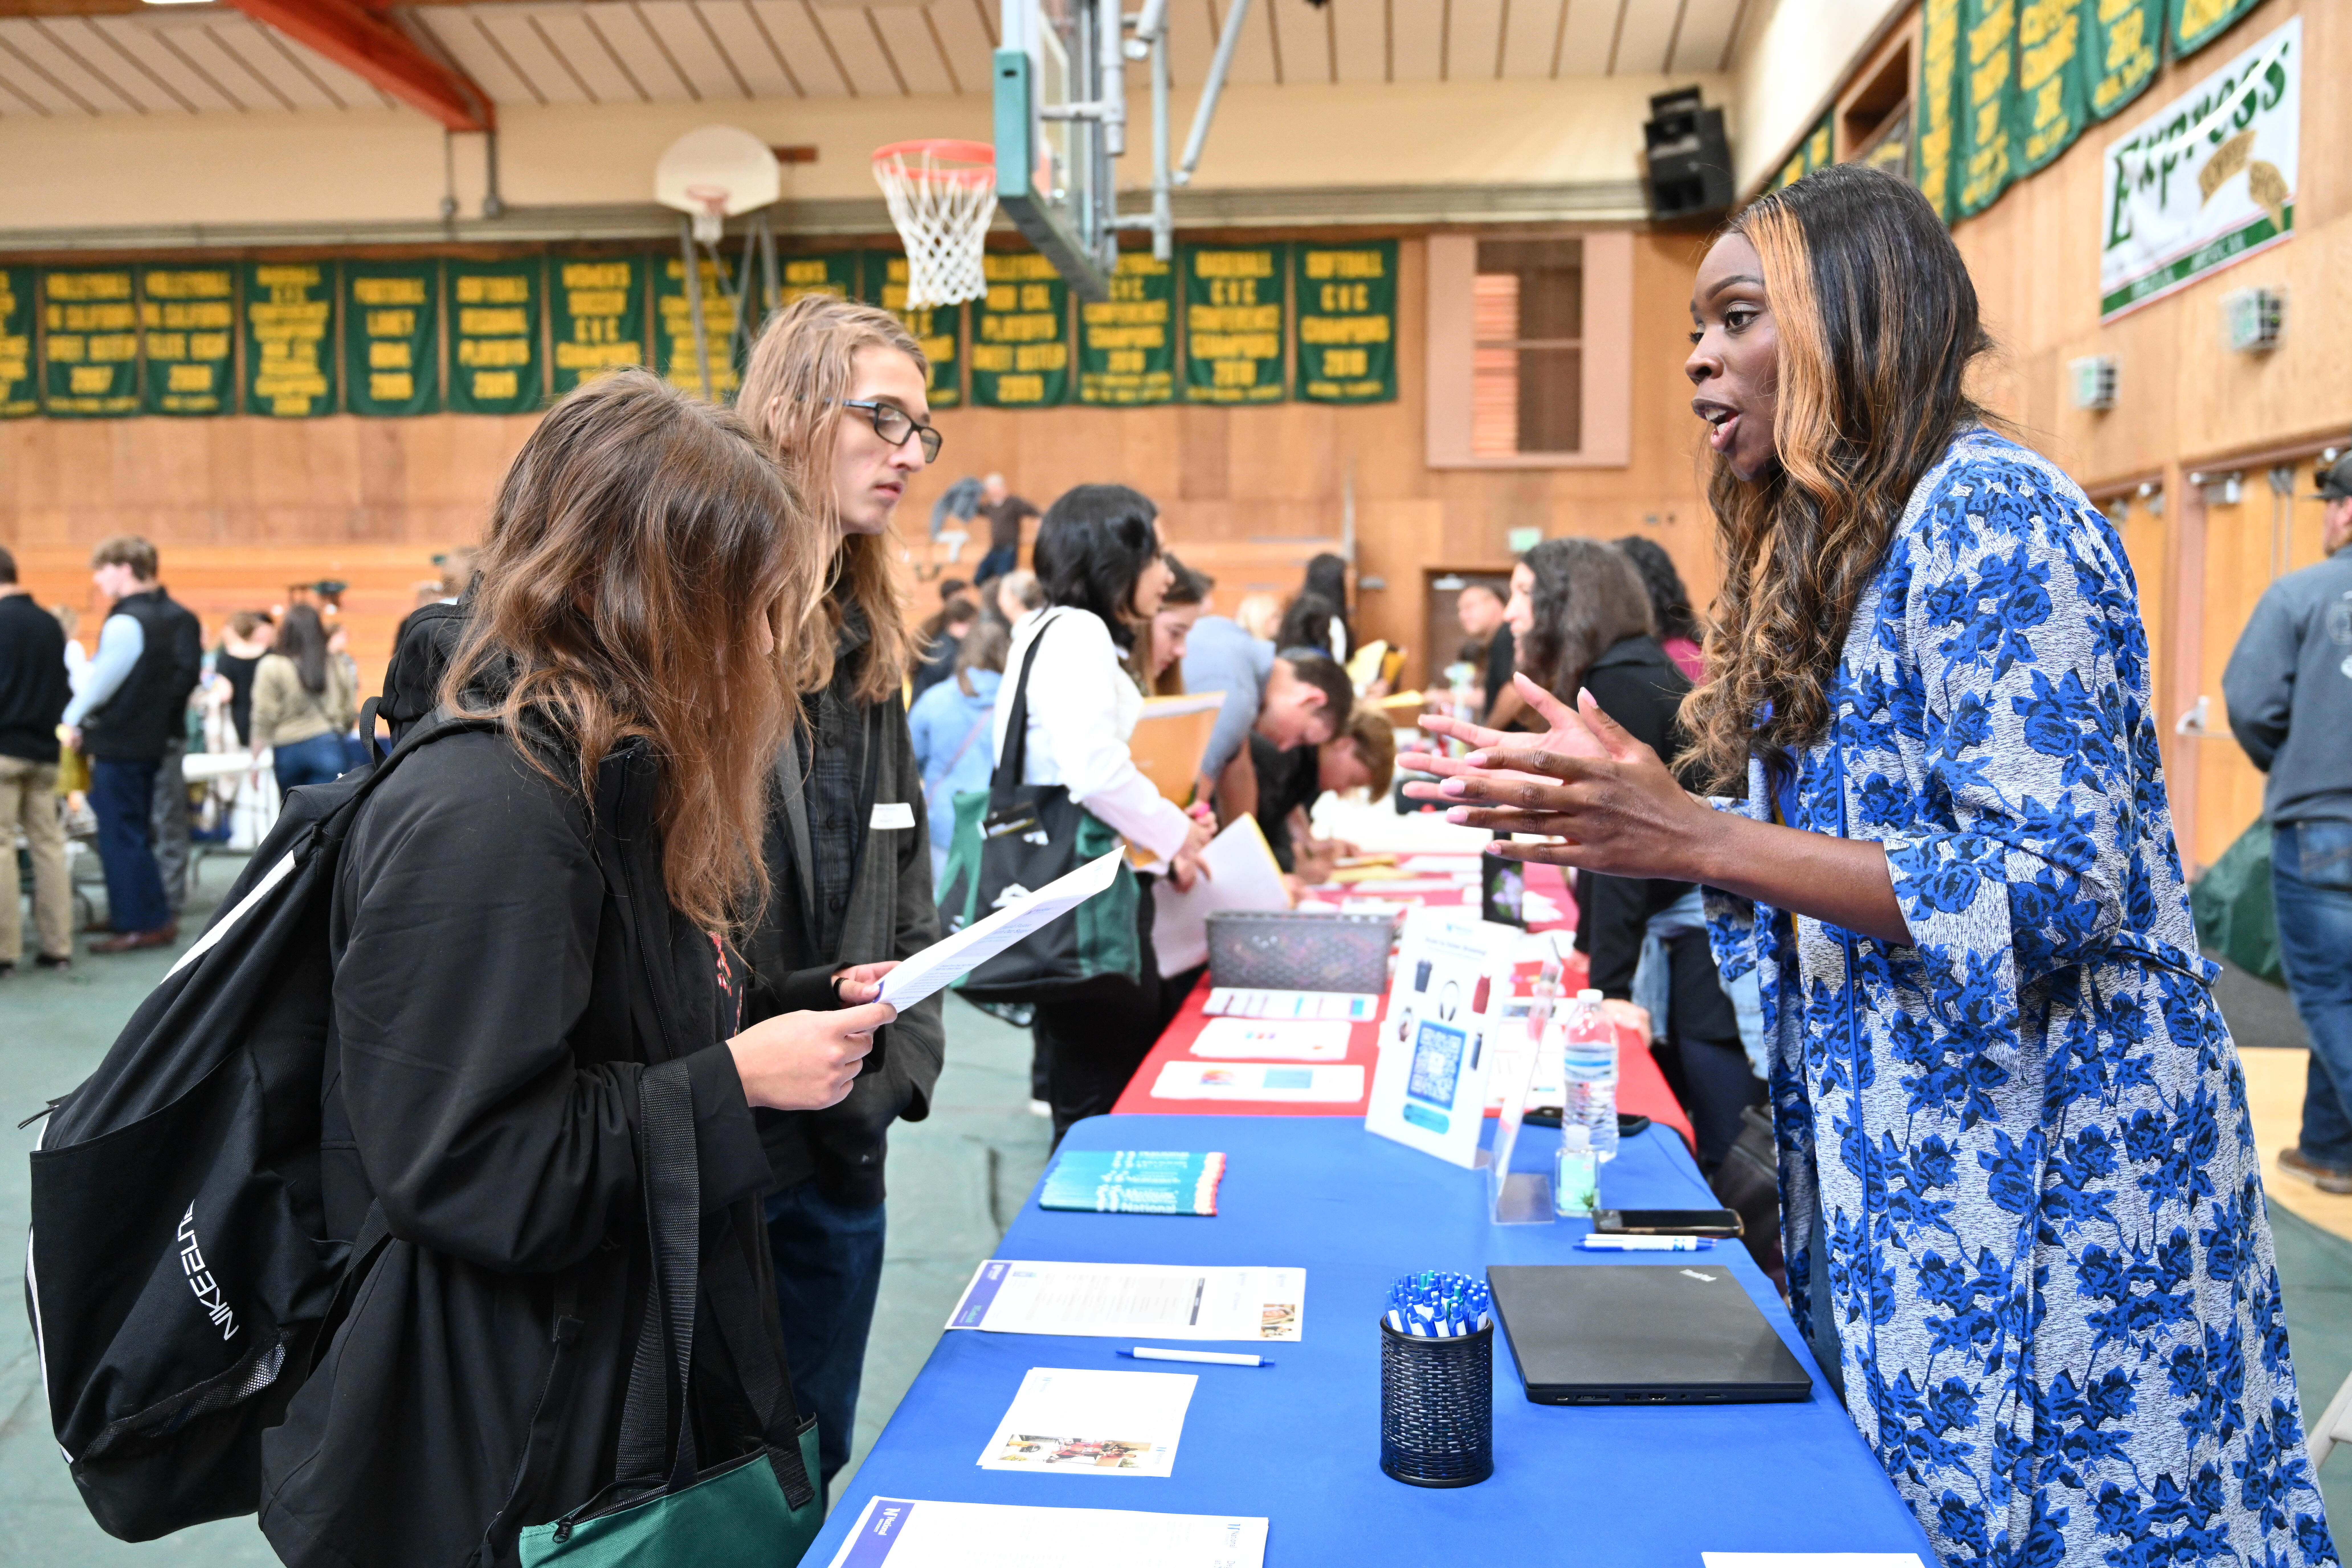 Speaking with students at the job fair